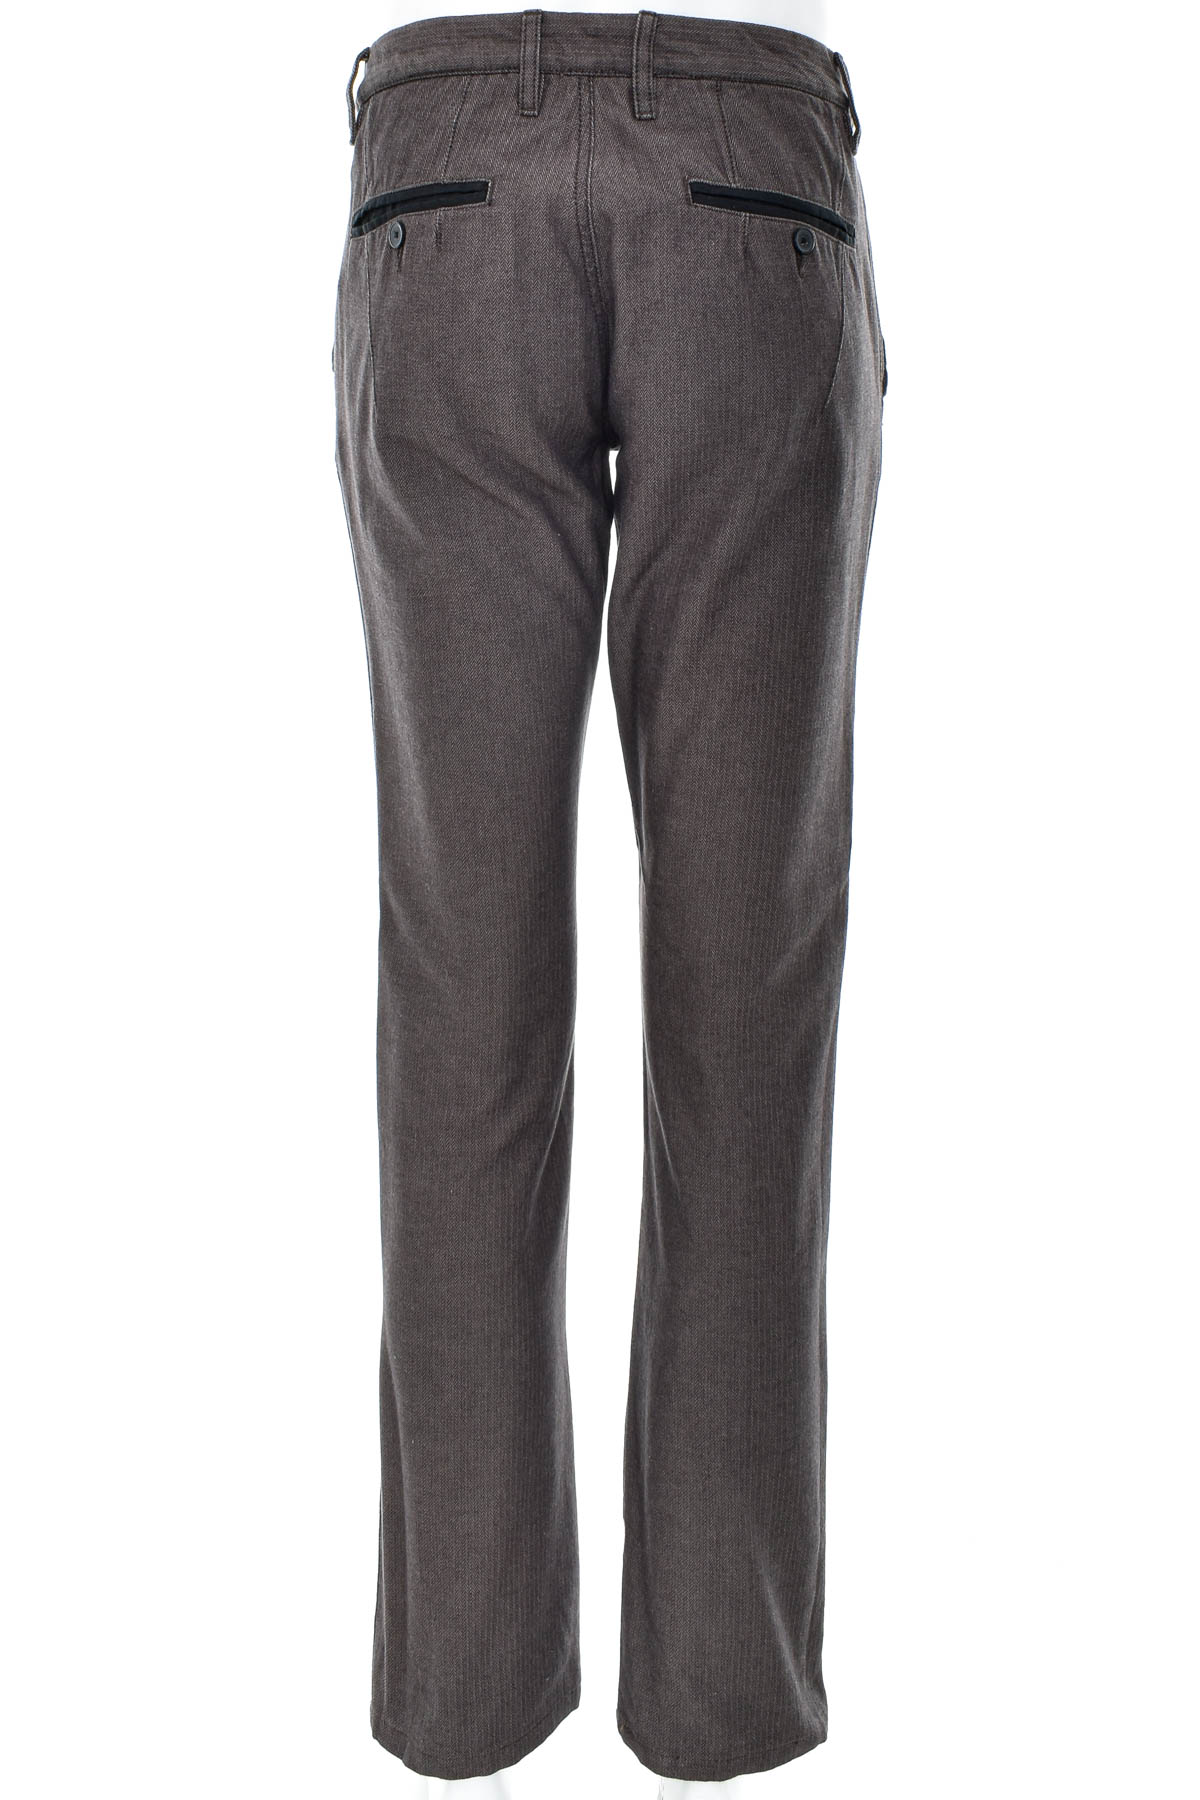 Men's trousers - SELECTED / HOMME - 1